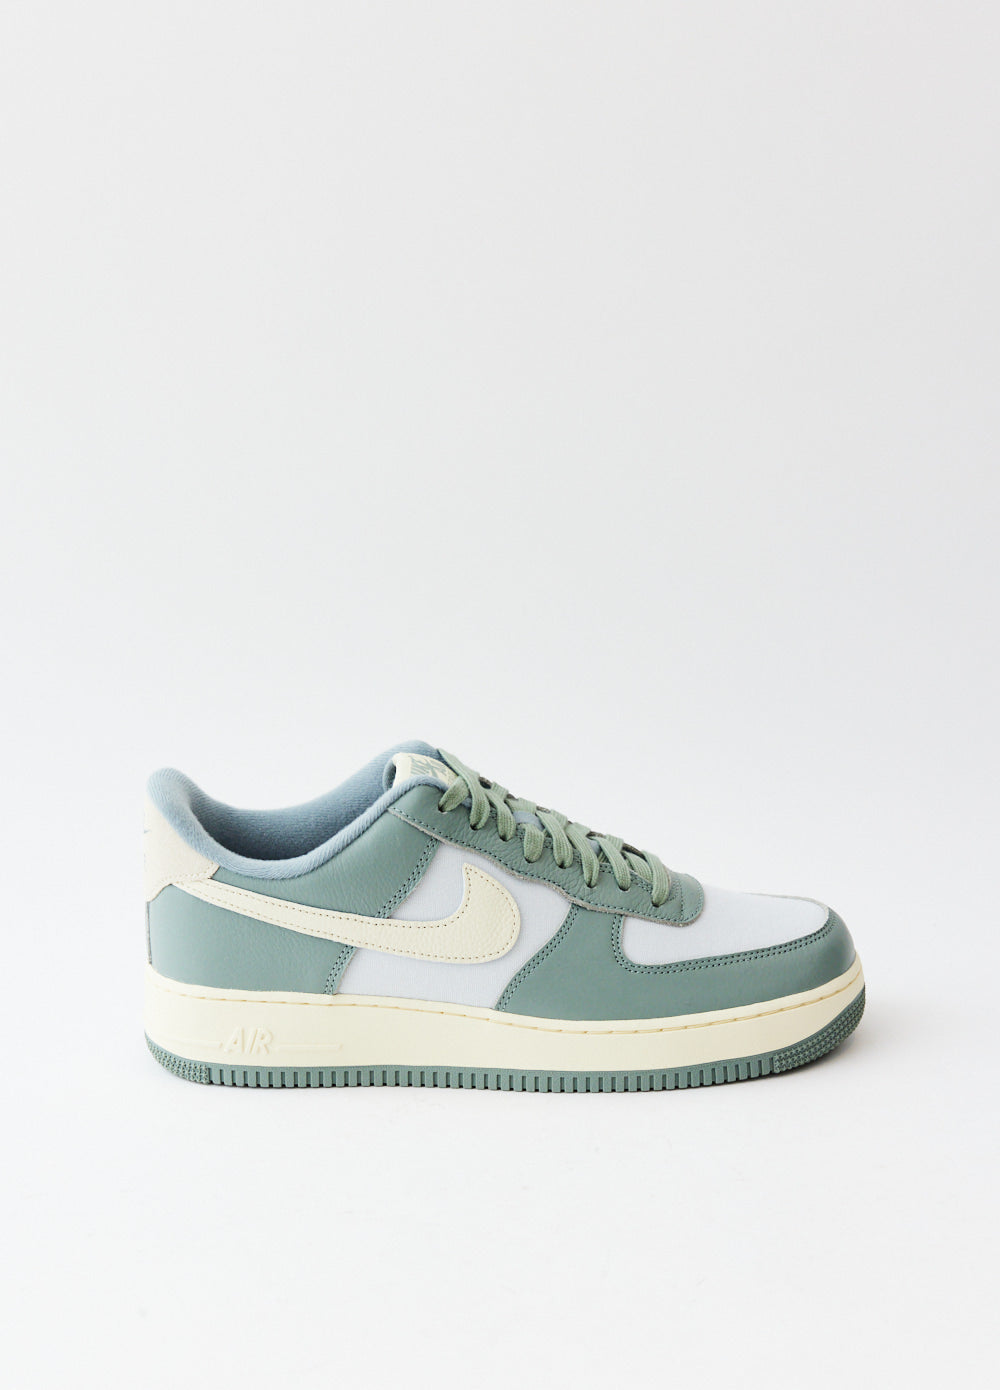 Nike Men's Air Force 1 '07 LX Sneakers in Green in Mica Green/Coconut Milk, Size UK 9.5 | End Clothing